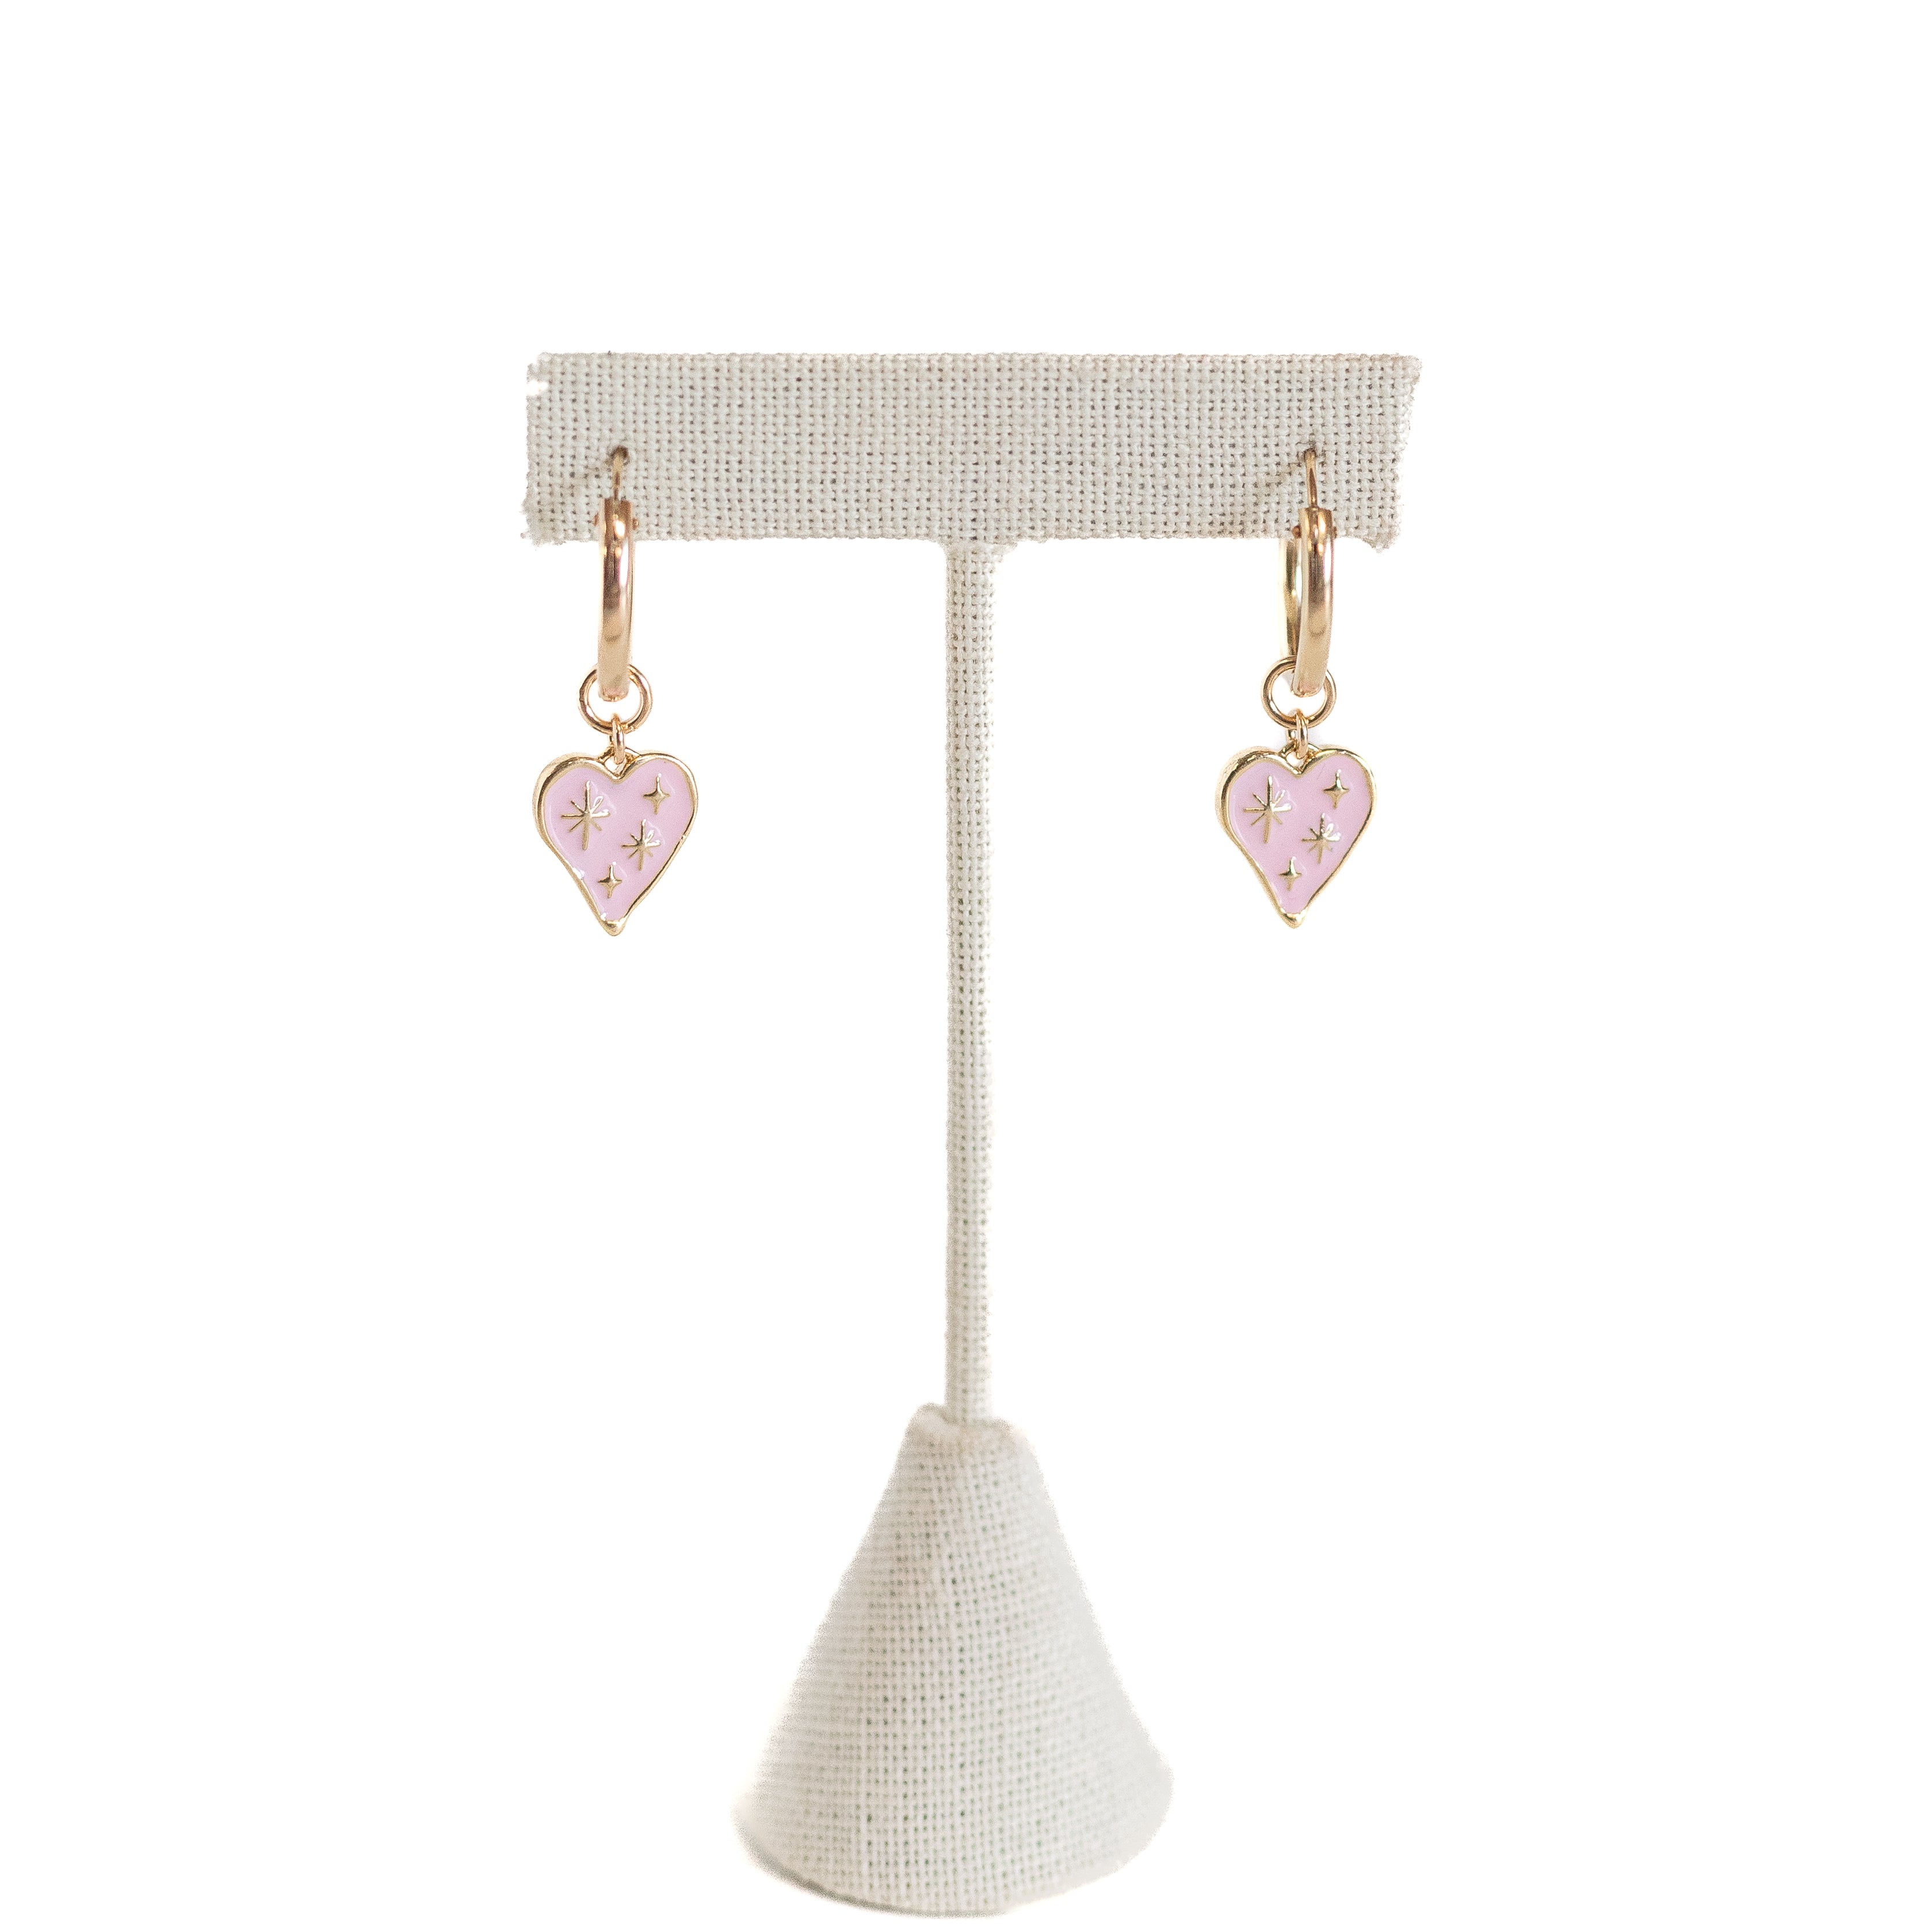 Pink heart charms on a gold hoop.